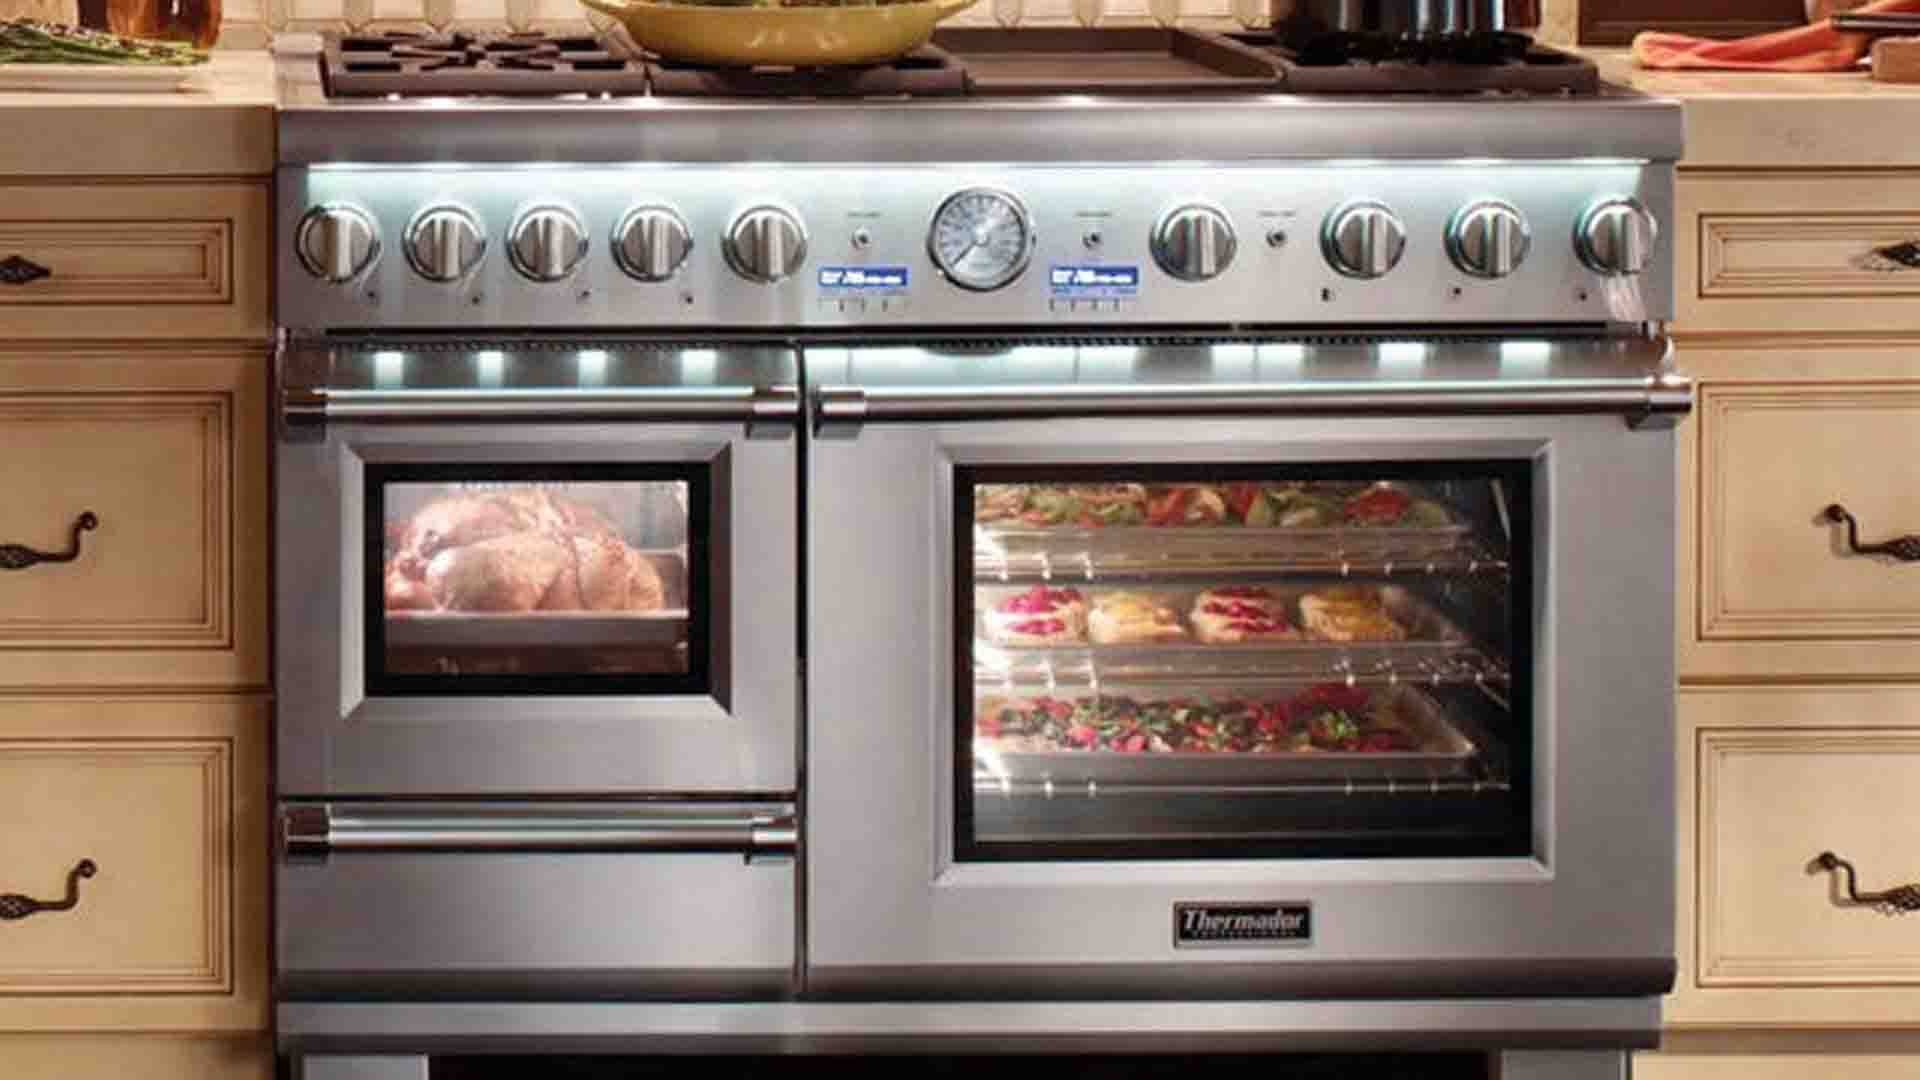 Everything You Should Know About the Right Ways to Turn On a Thermador Oven